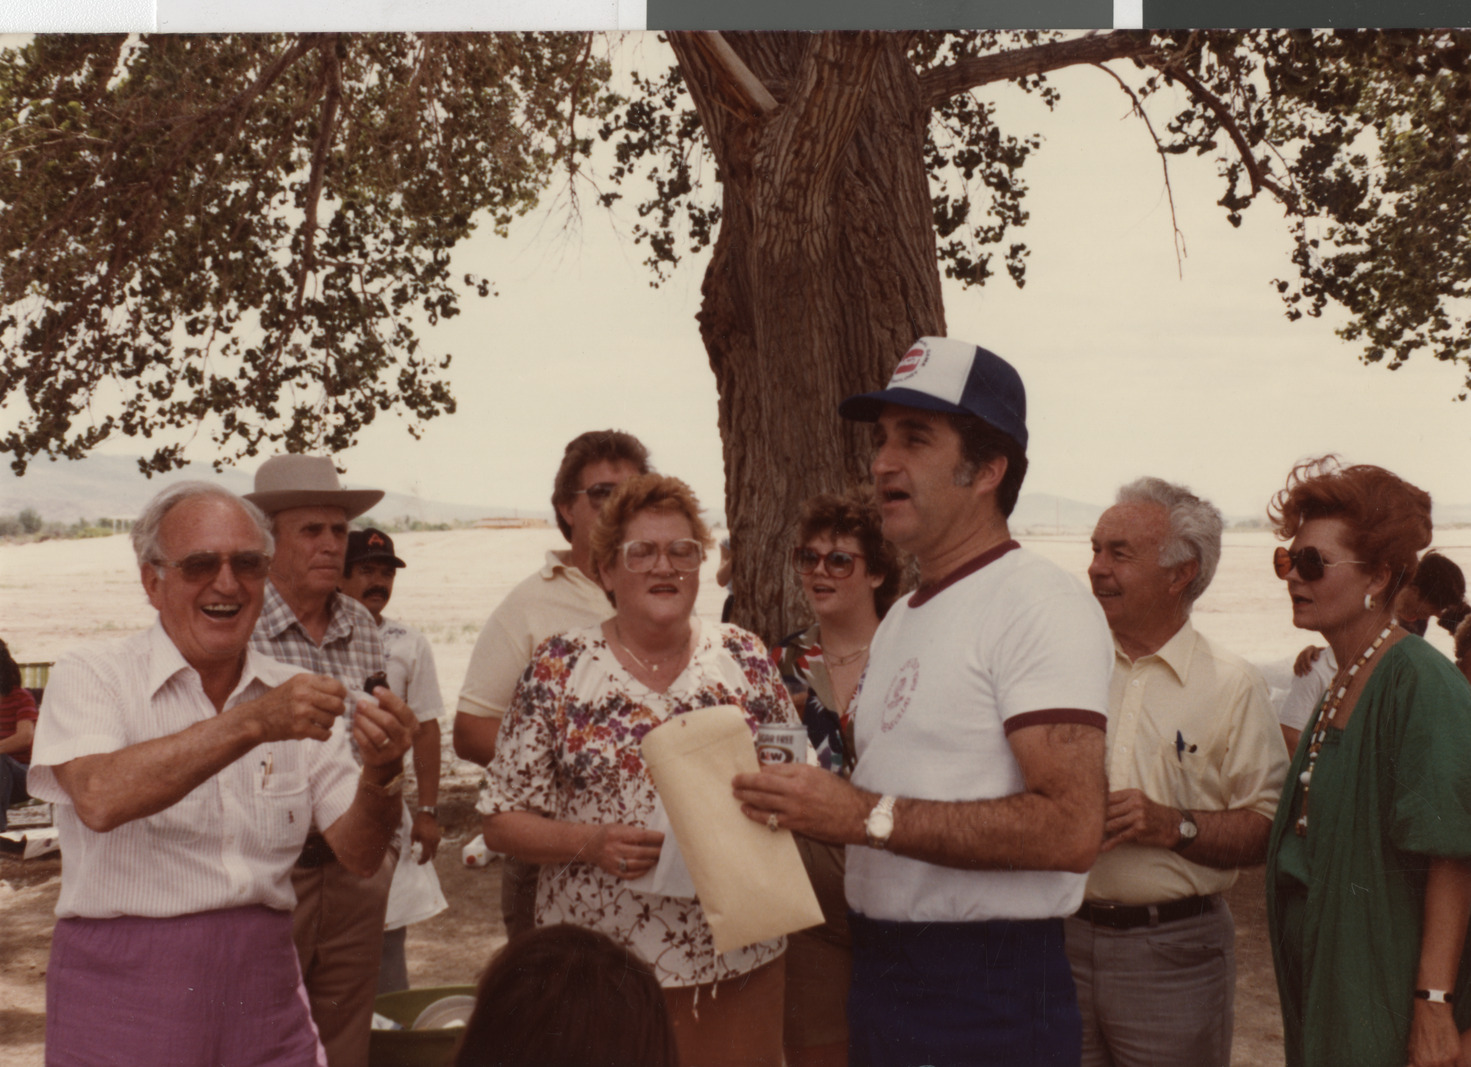 Photograph of Ron Lurie standing under a tree with a group of people